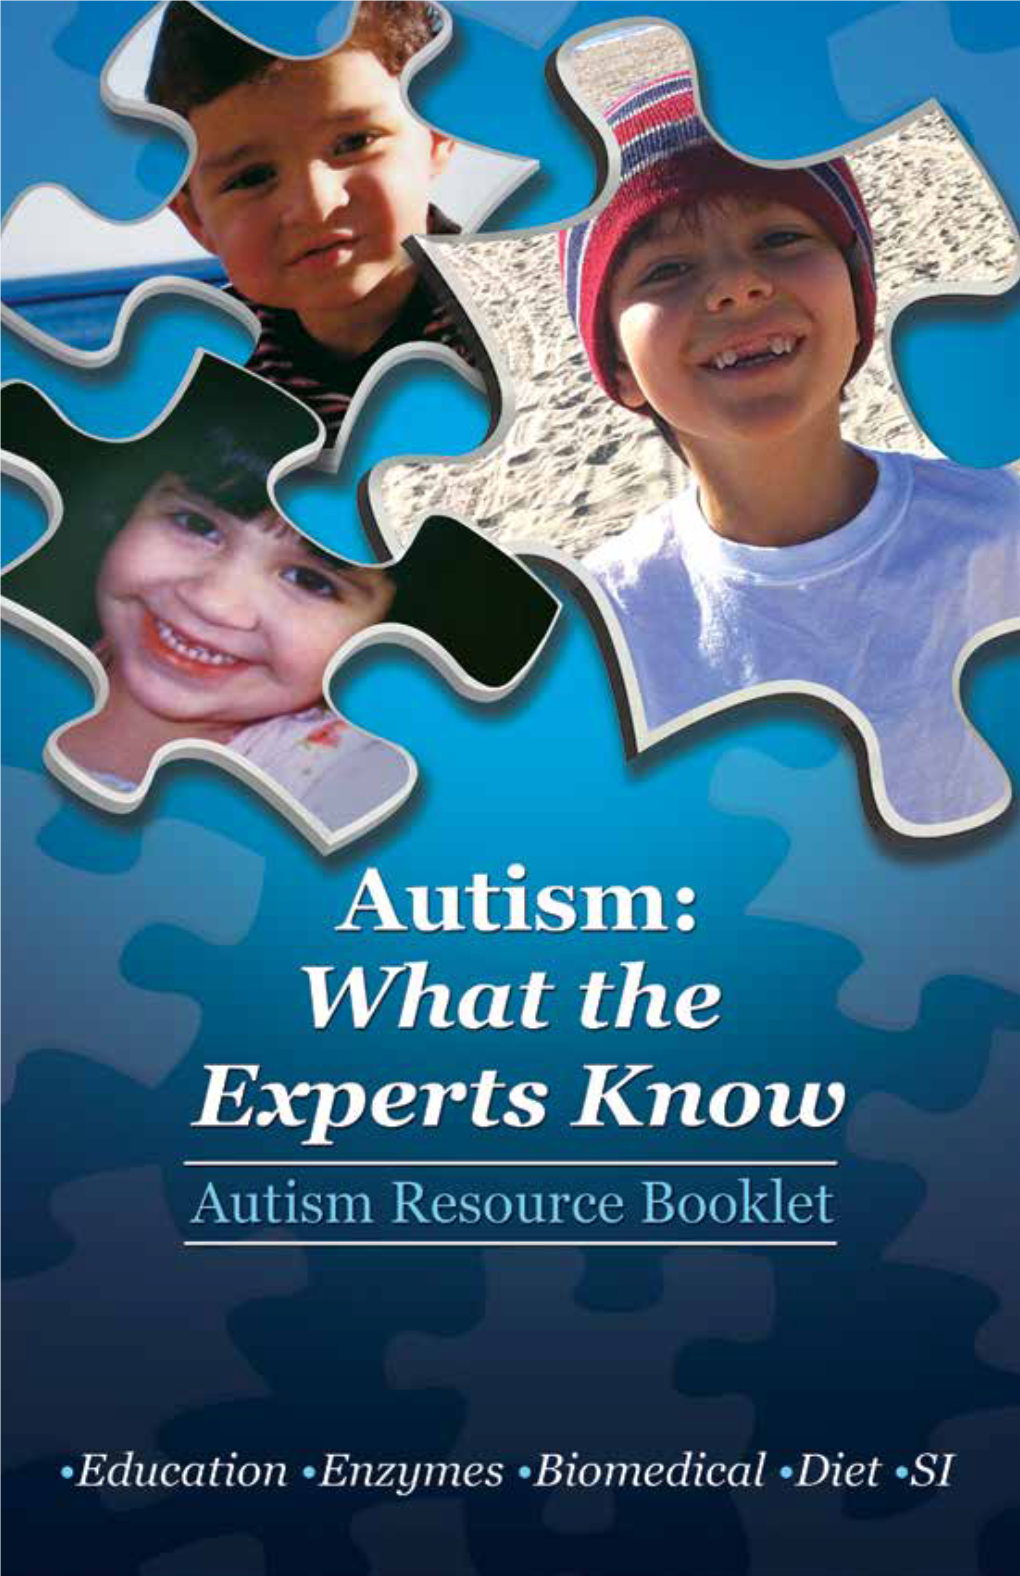 Autism Resource Booklet Progress for One Provides Hope for All